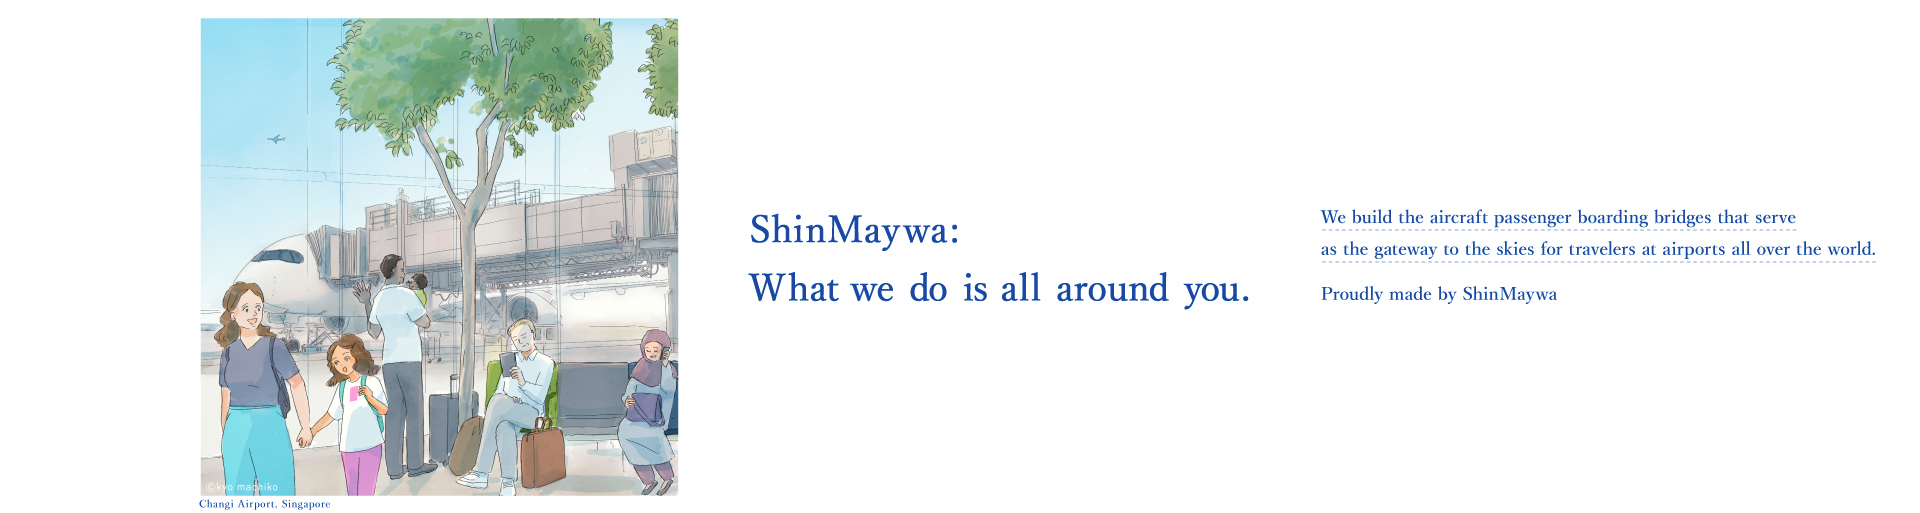 Actually, Shinmeiwa. ShinMaywa Group is actually the company that makes the "boarding bridge" that take us on a journey through the sky at airports around the world where travelers come and go.